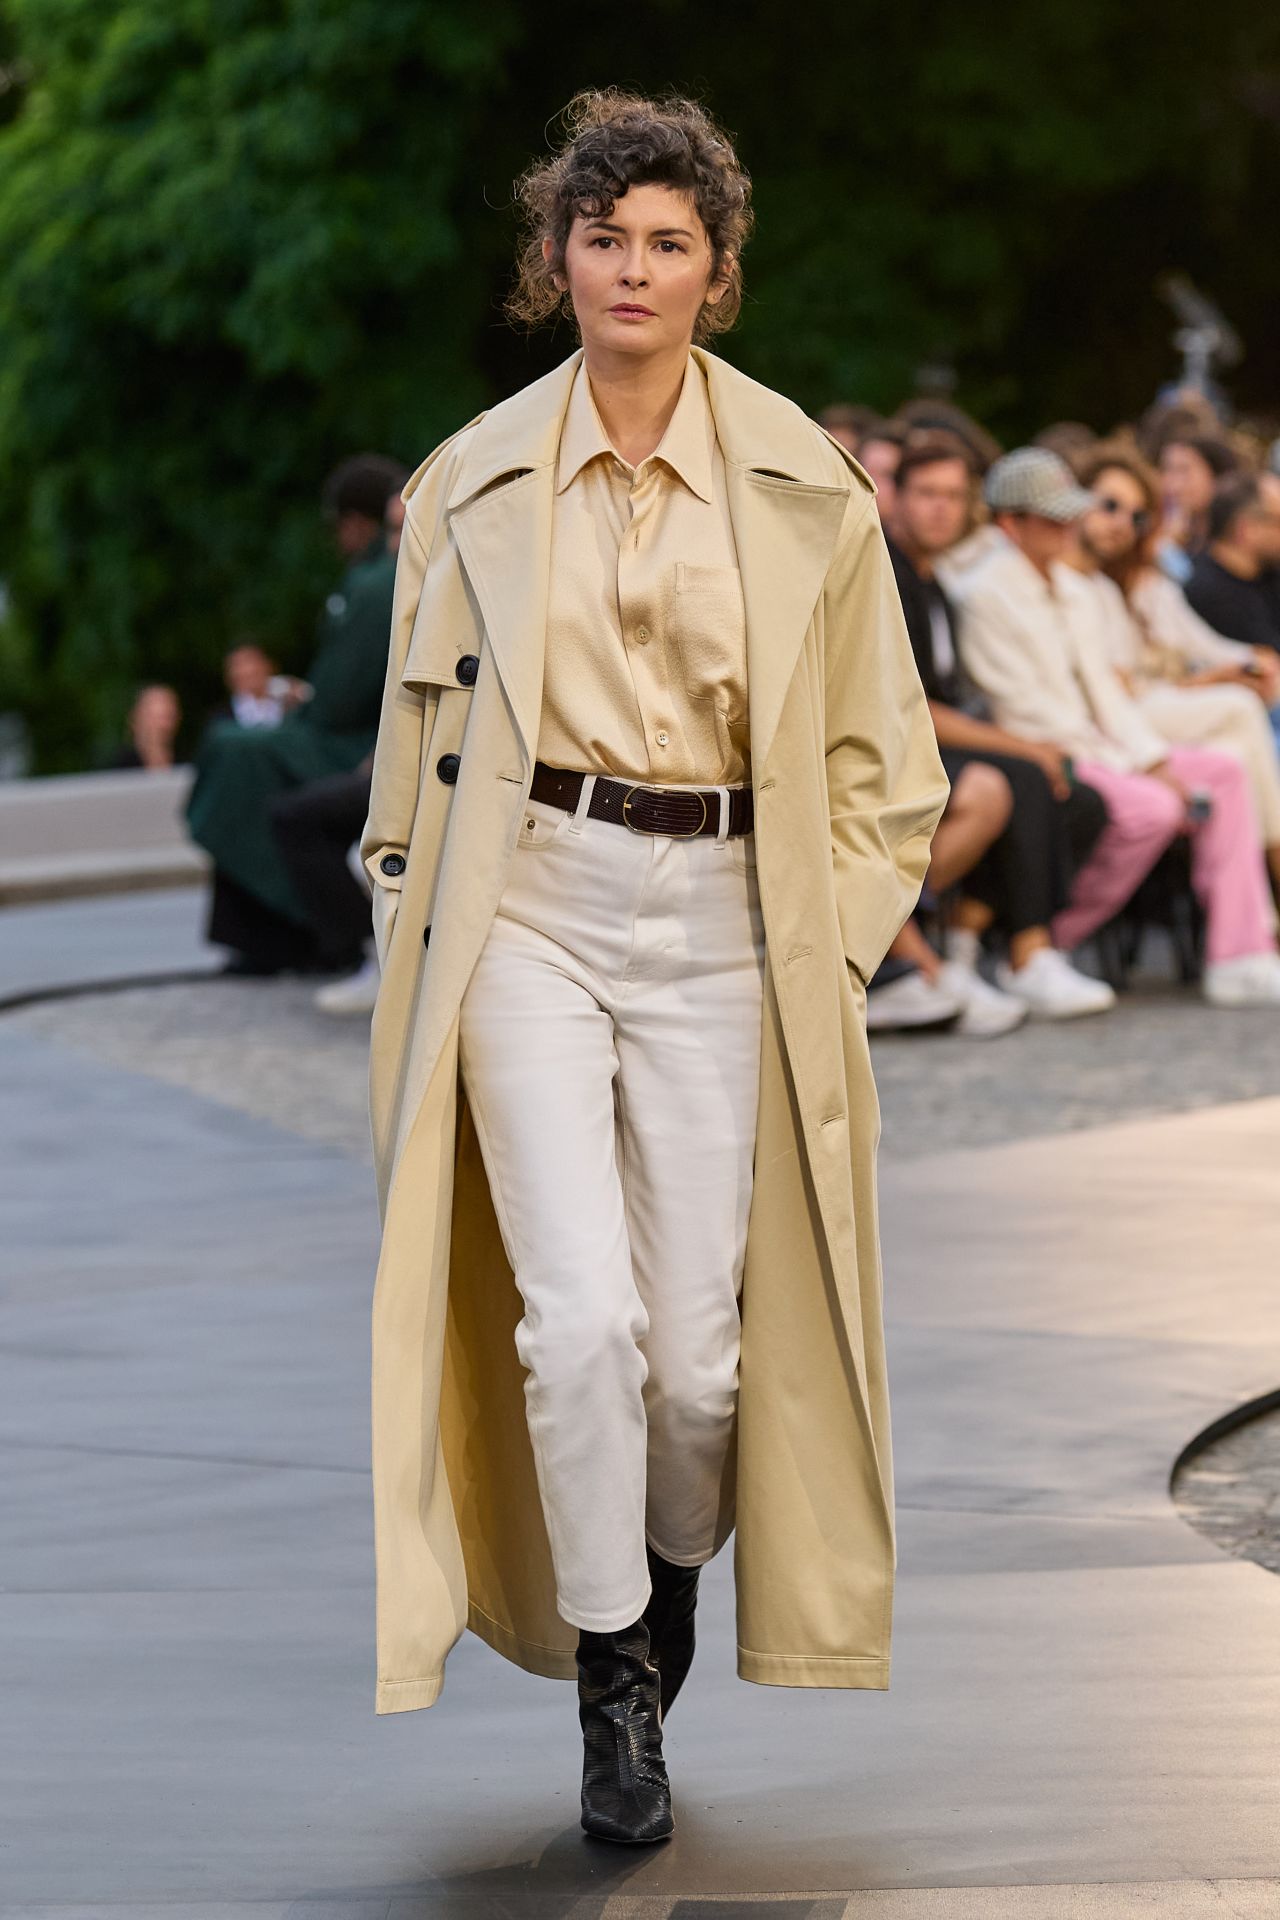 Audrey Tautou, the French actress, walked in the Ami show wearing a classic Parisian trench coat.